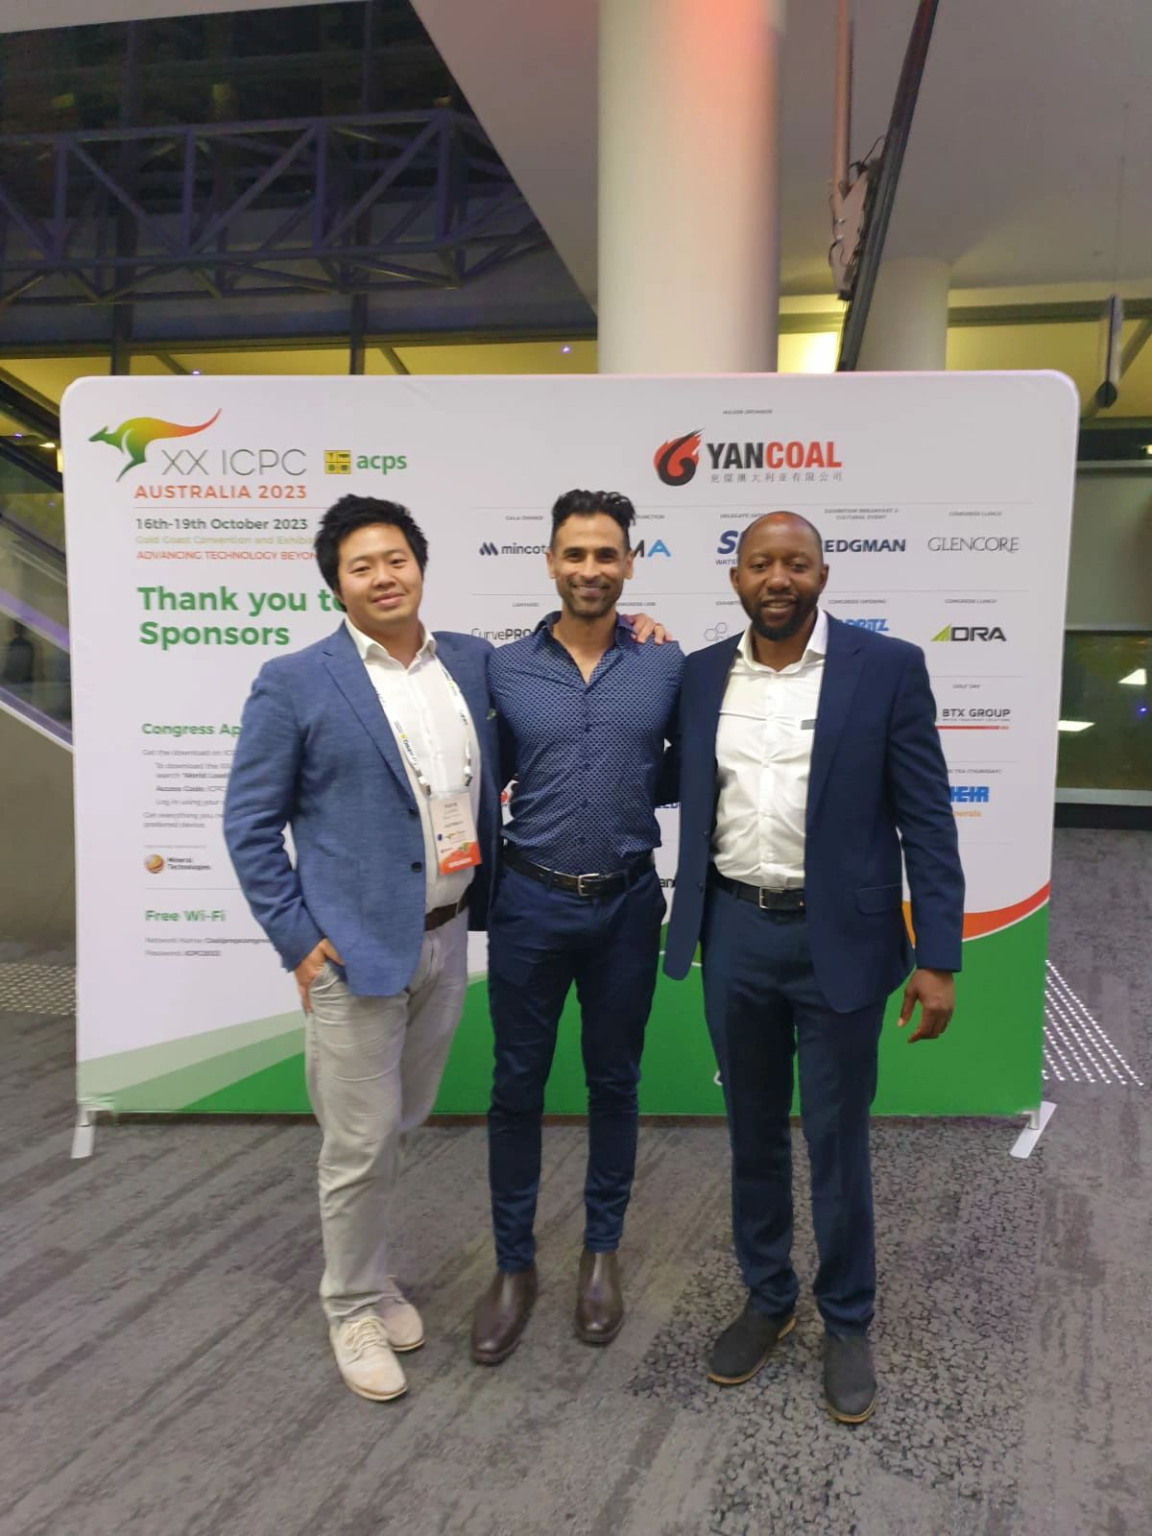 Mipac Senior Process Engineer Hans Liang (first on left, standing beside two other men in front of a branded sign) at the International Coal Preparation Congress (ICPC) on the Gold Coast, where he presented the case study of the Narrabri Coal Loadout Facility Optimisation Project